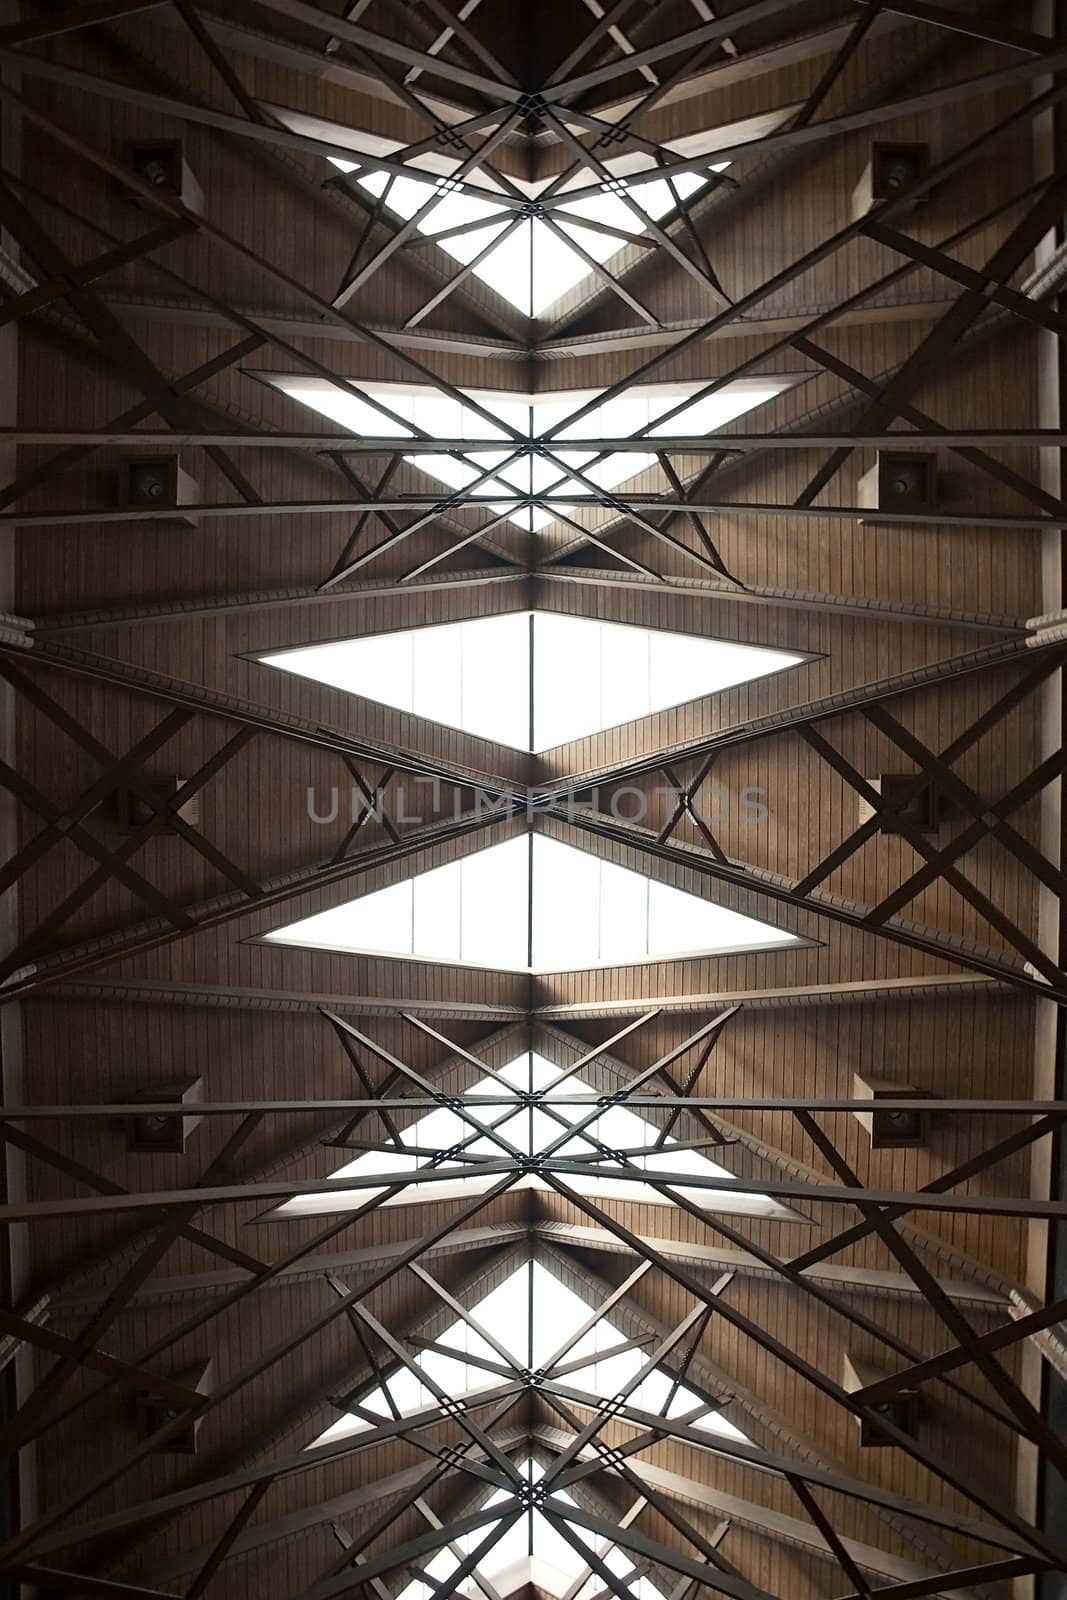 An abstract ceiling made of wood and glass